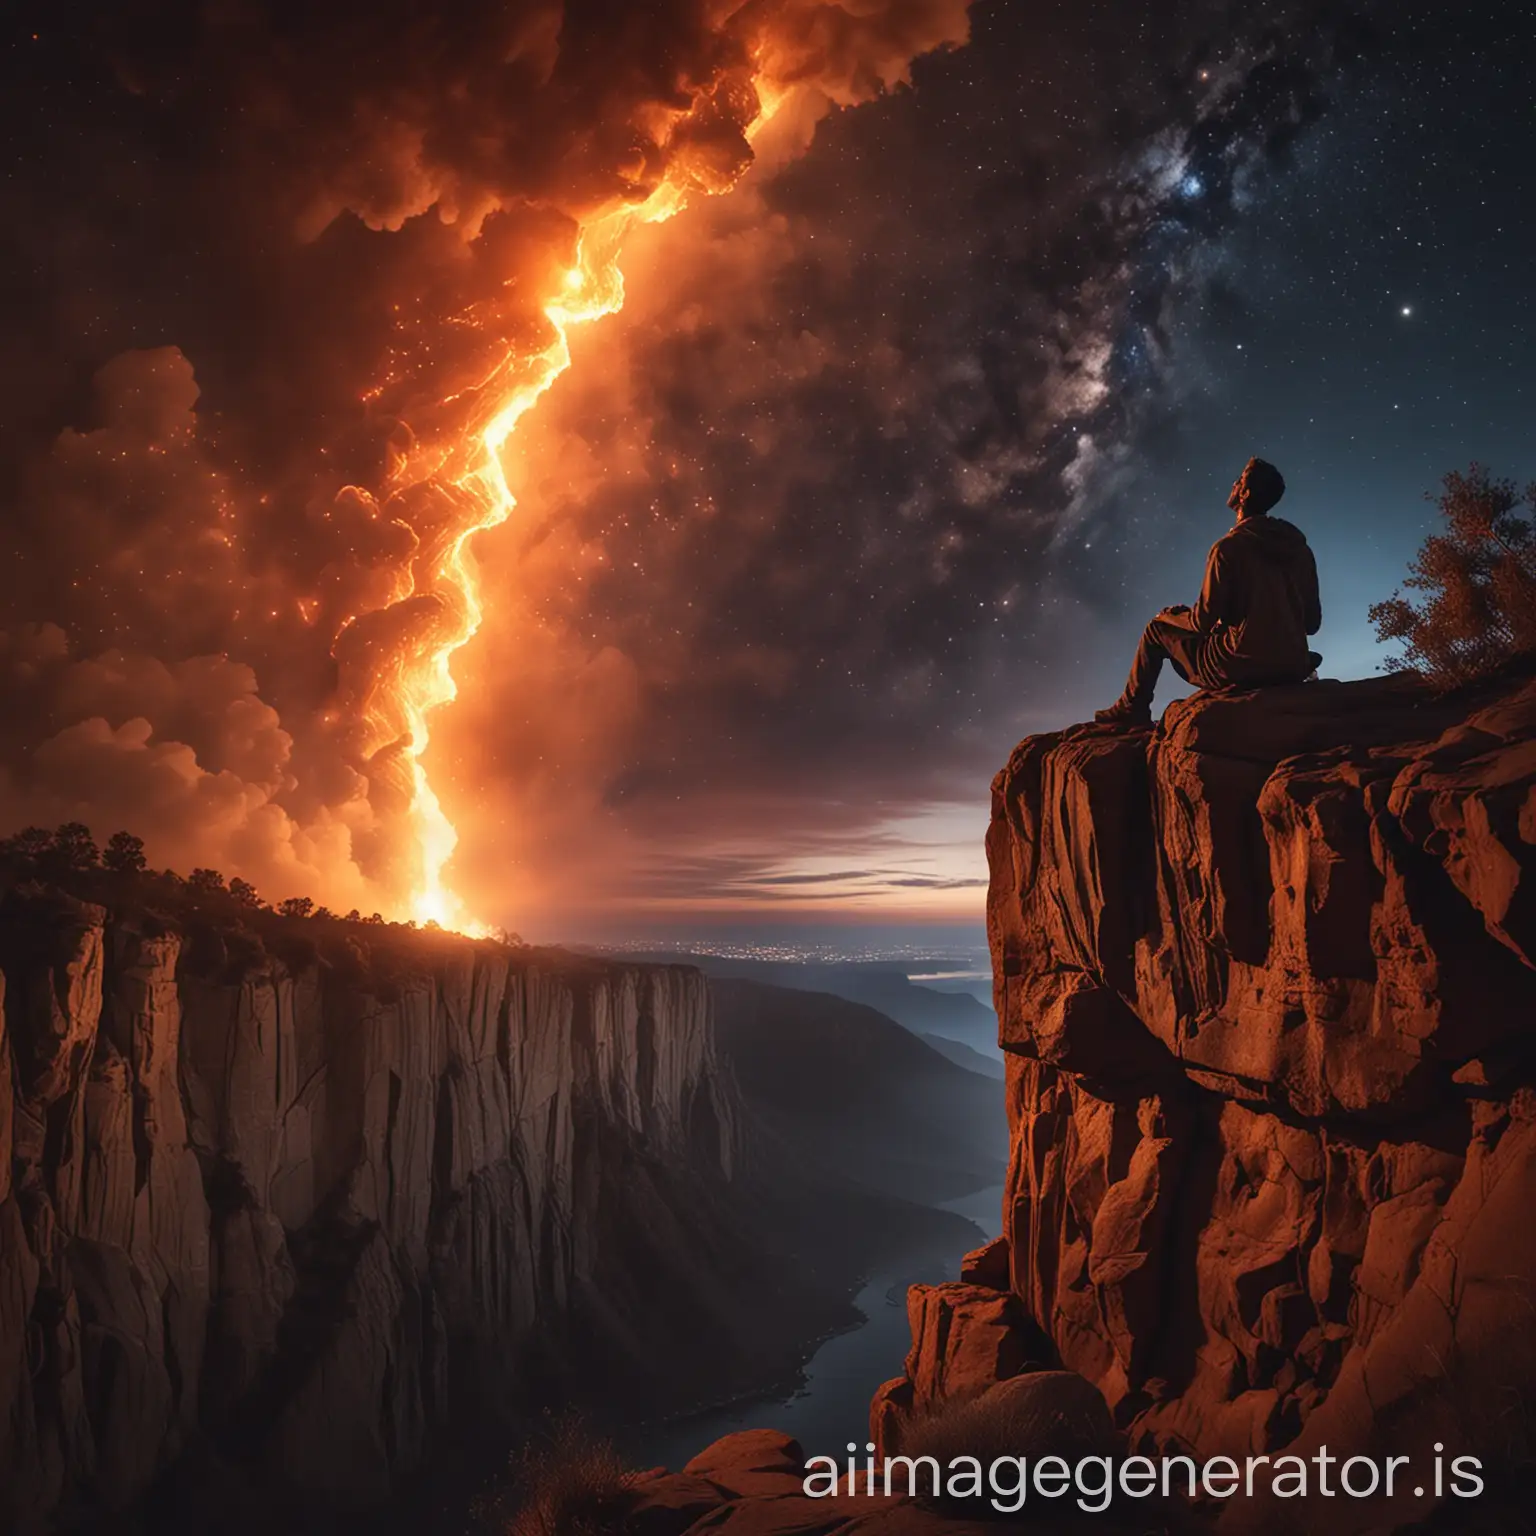 Contemplative-Man-on-Cliff-at-Night-Under-Divine-Sky